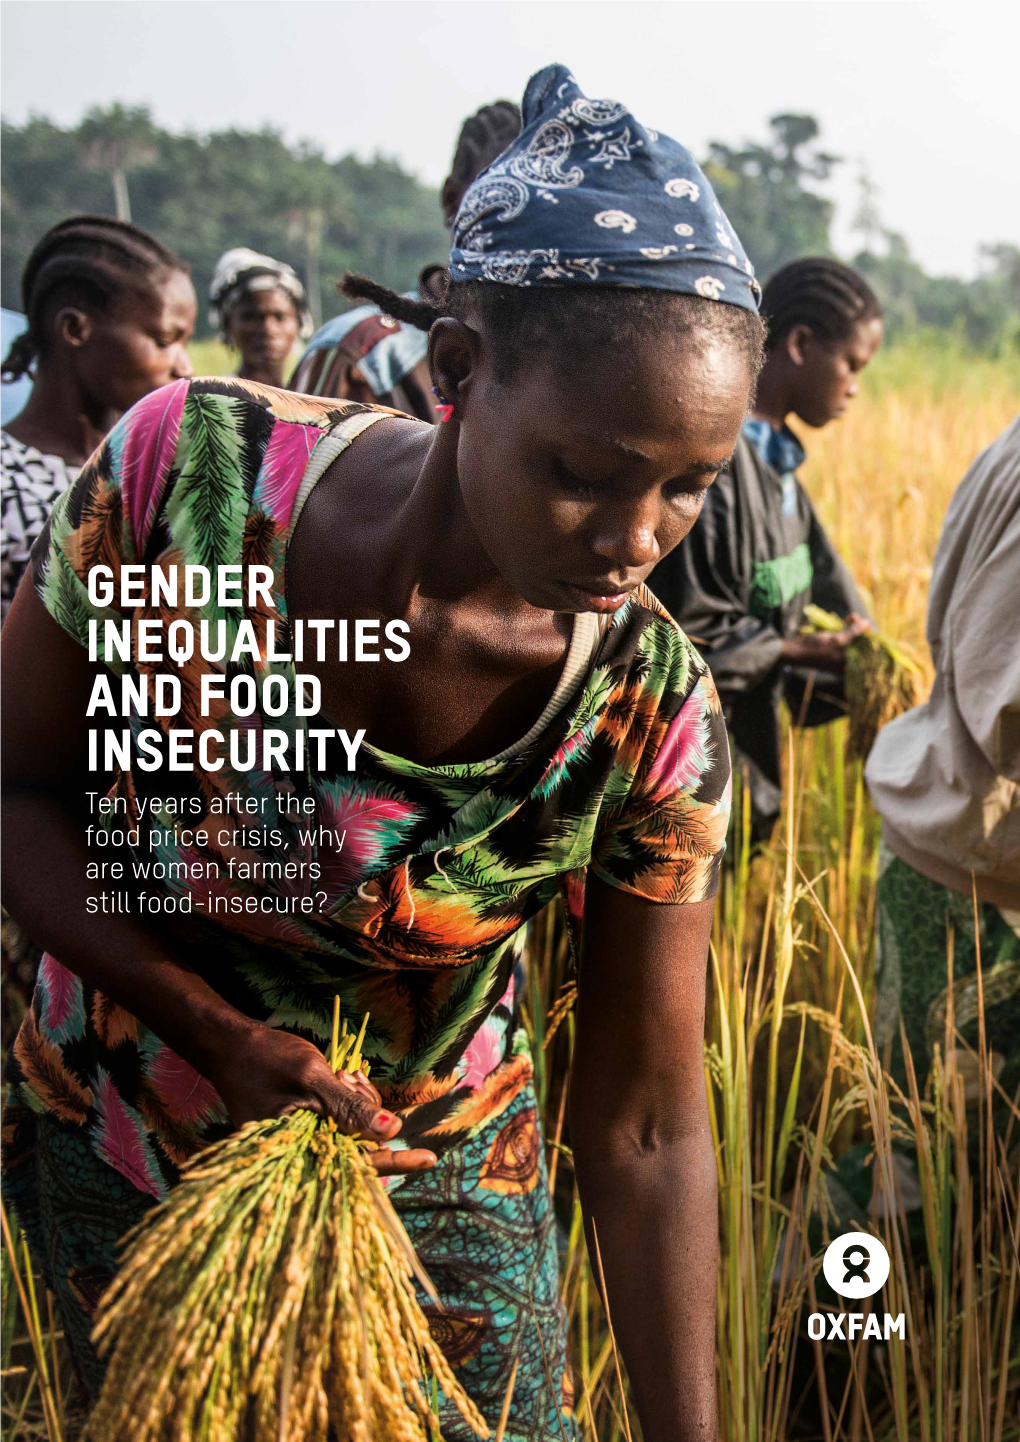 GENDER INEQUALITIES and FOOD INSECURITY Ten Years After the Food Price Crisis, Why Are Women Farmers Still Food-Insecure?